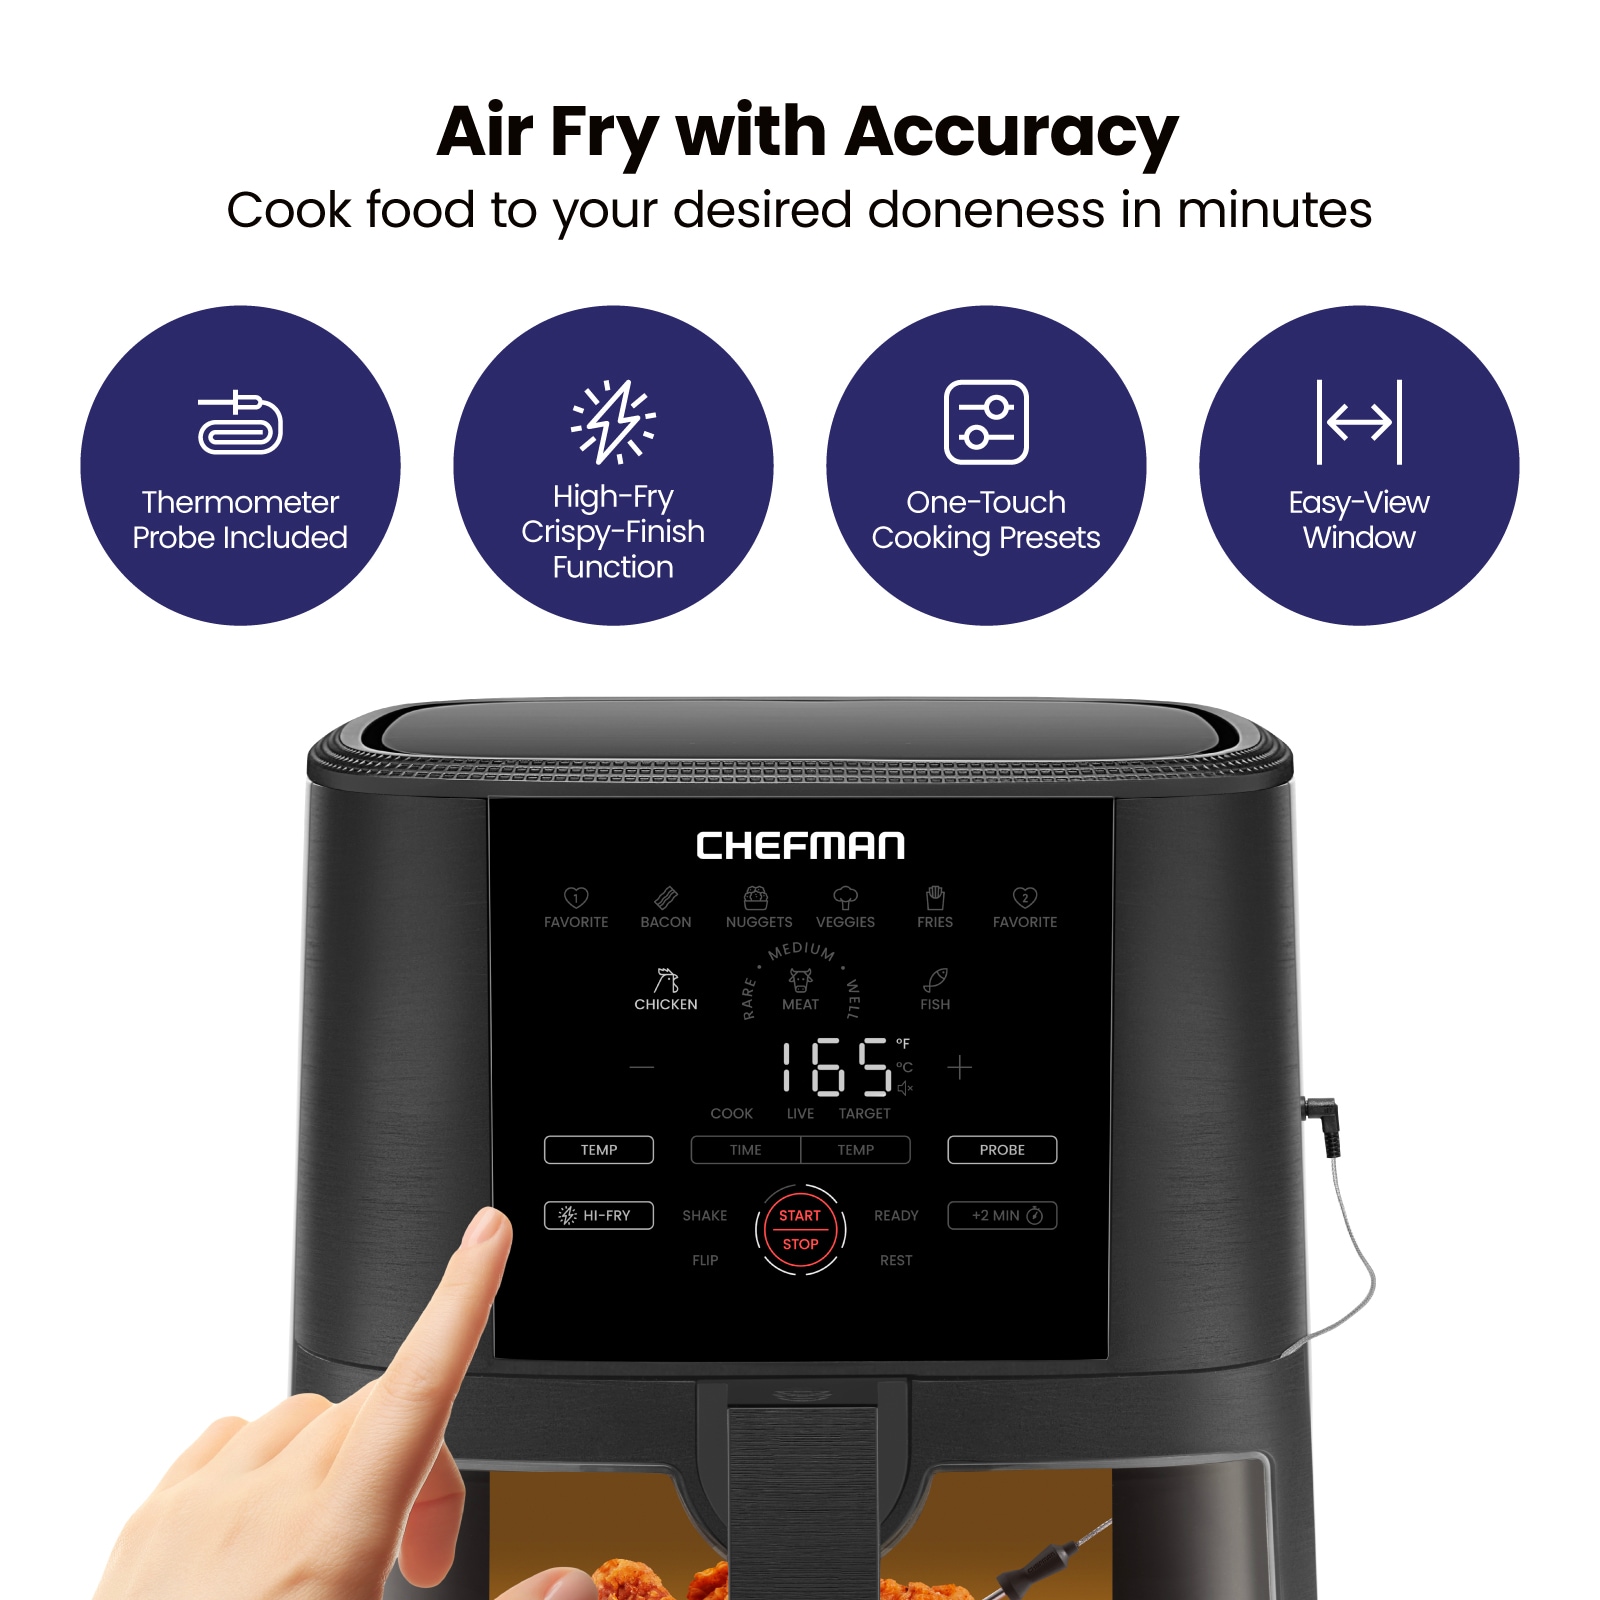 Chefman TurboFry Touch Air Fryer, The Most Compact And Healthy Way